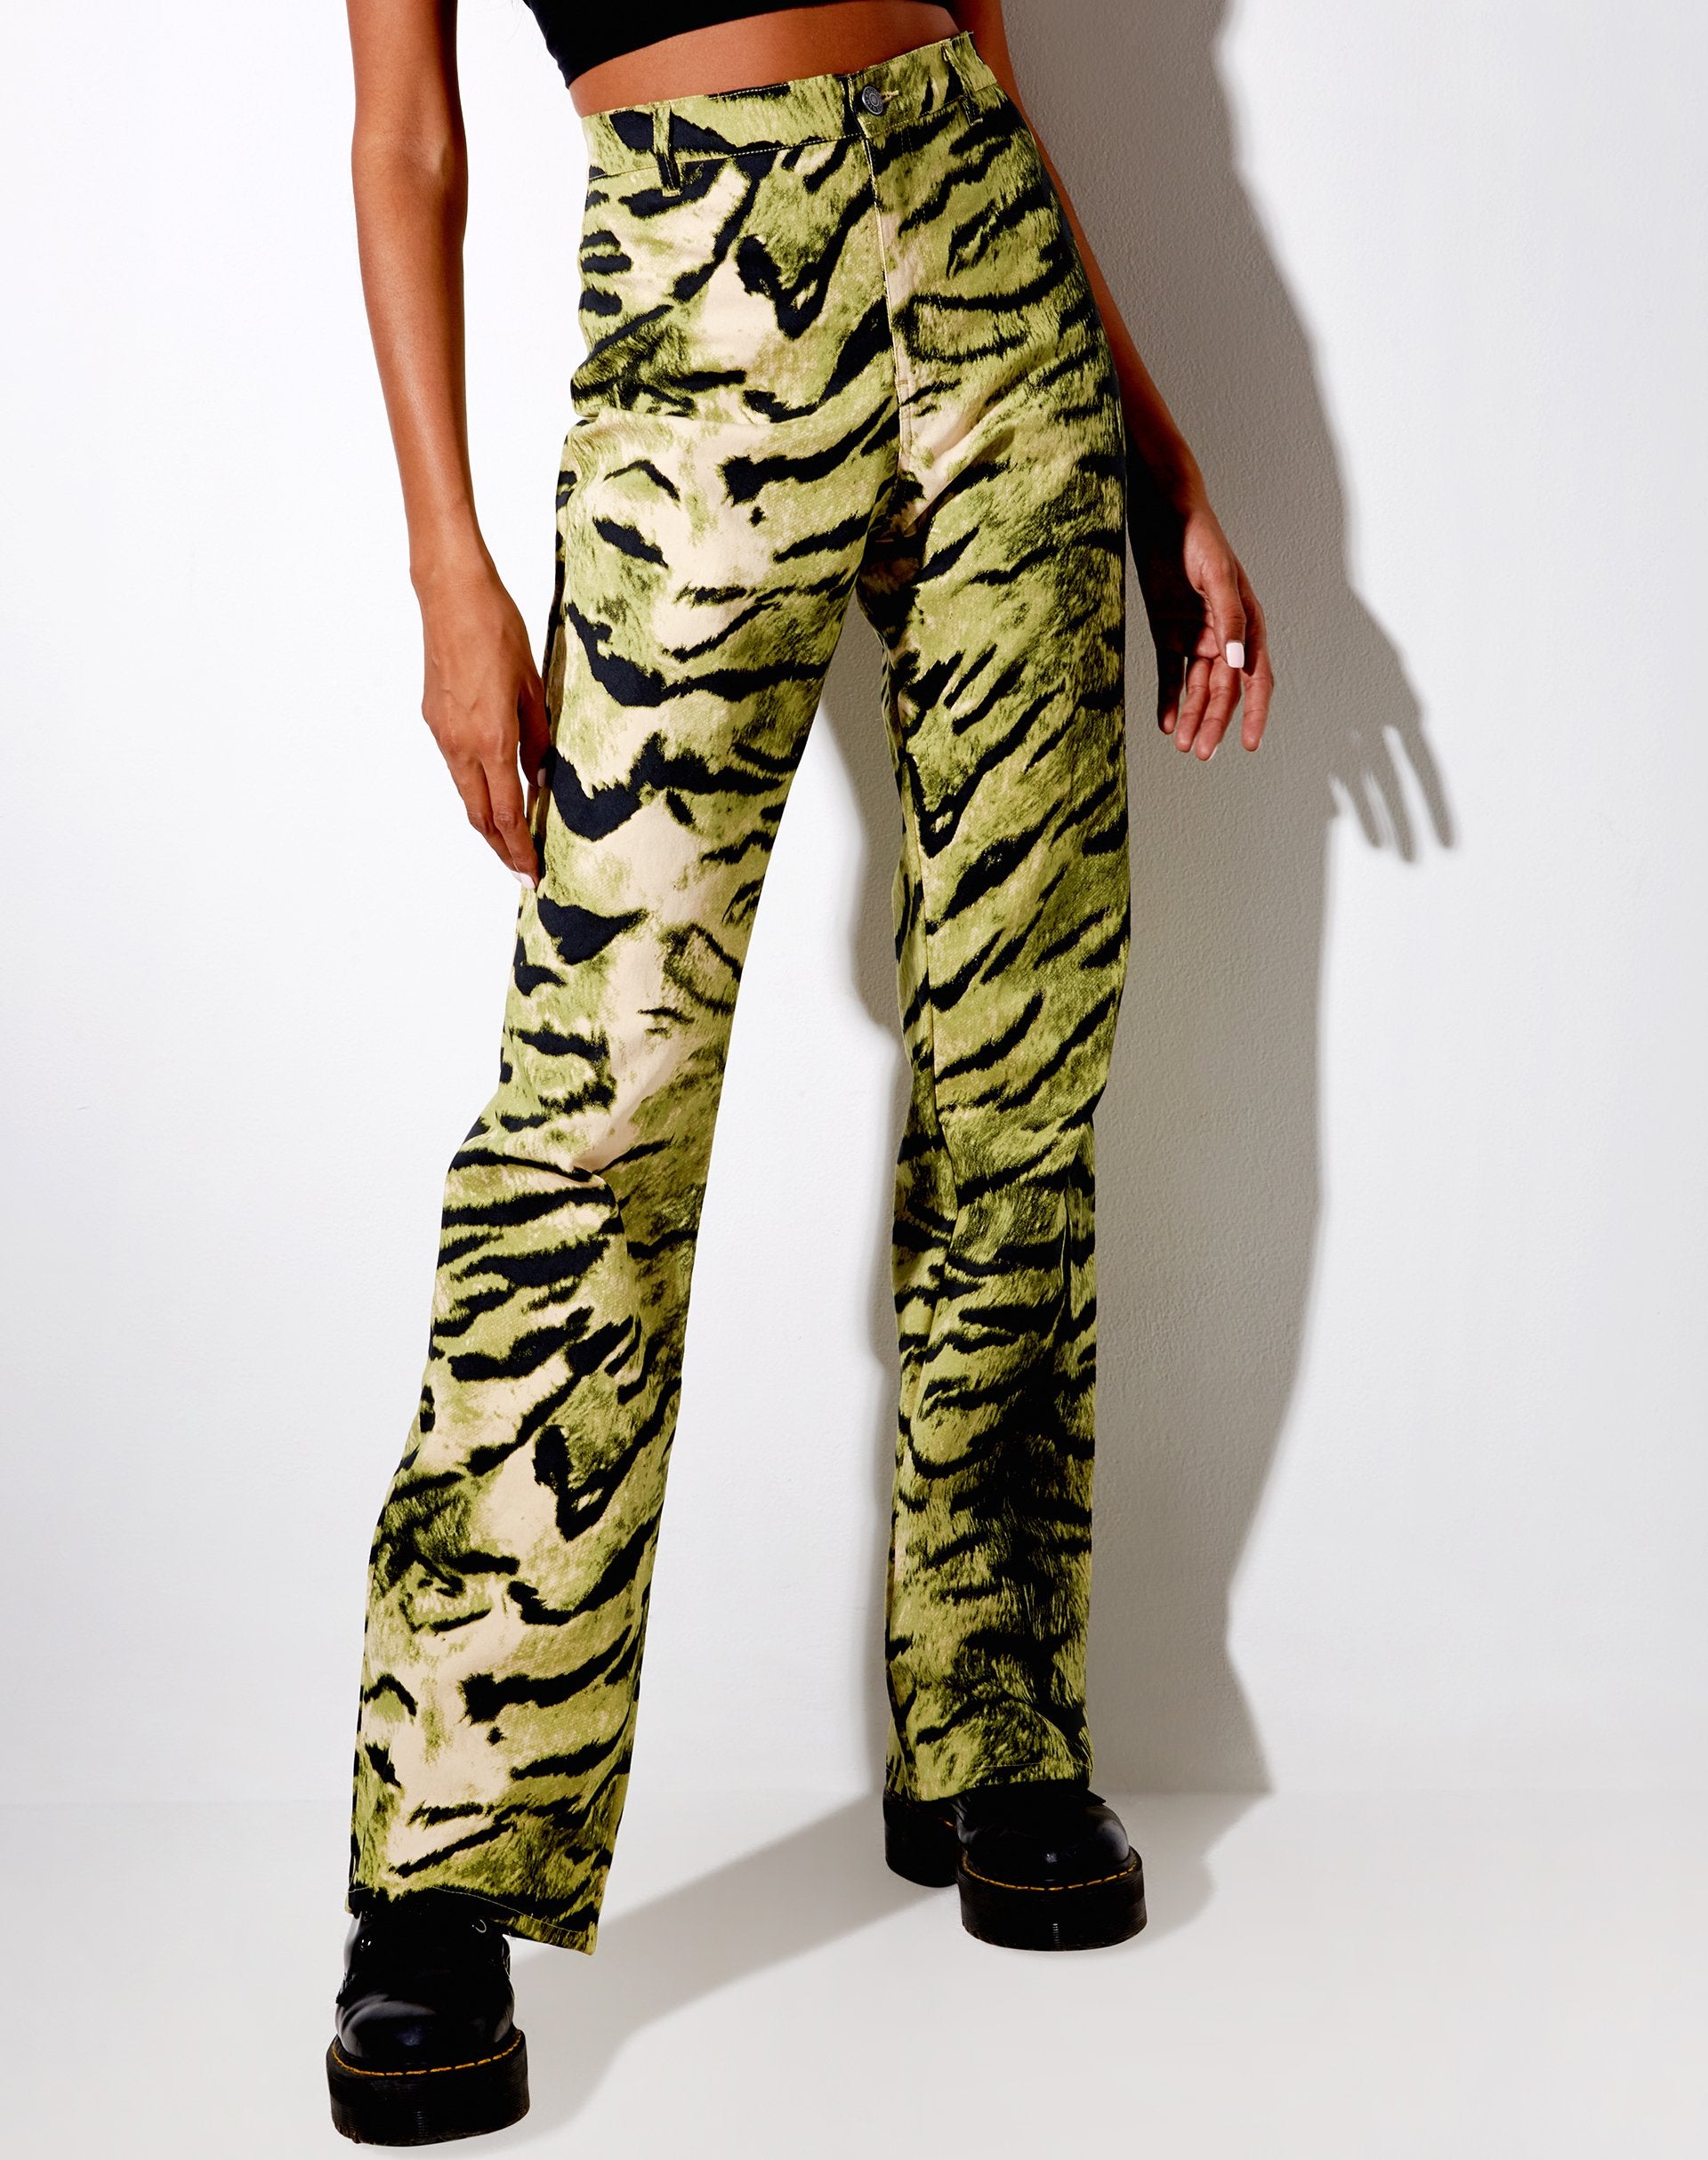 Image of Zoven Flare Trouser in Tiger Full Khaki Placement